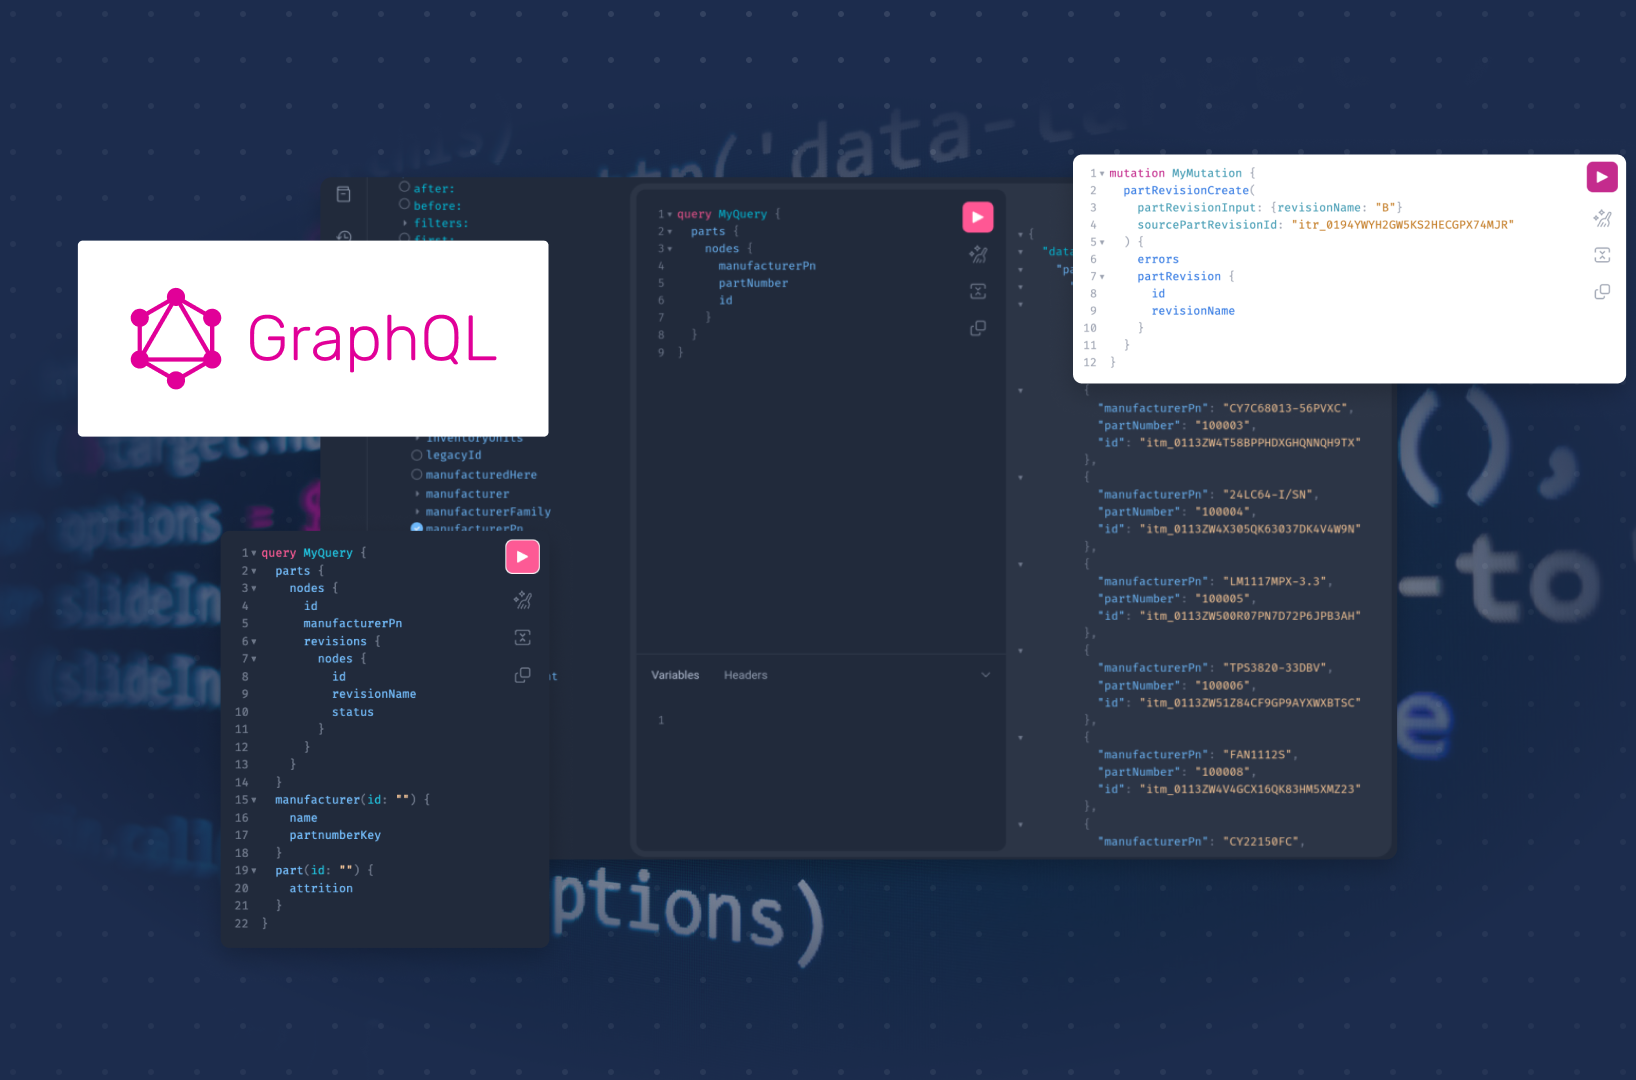 New GraphQL API Offers Speed,Performance, and Efficiency